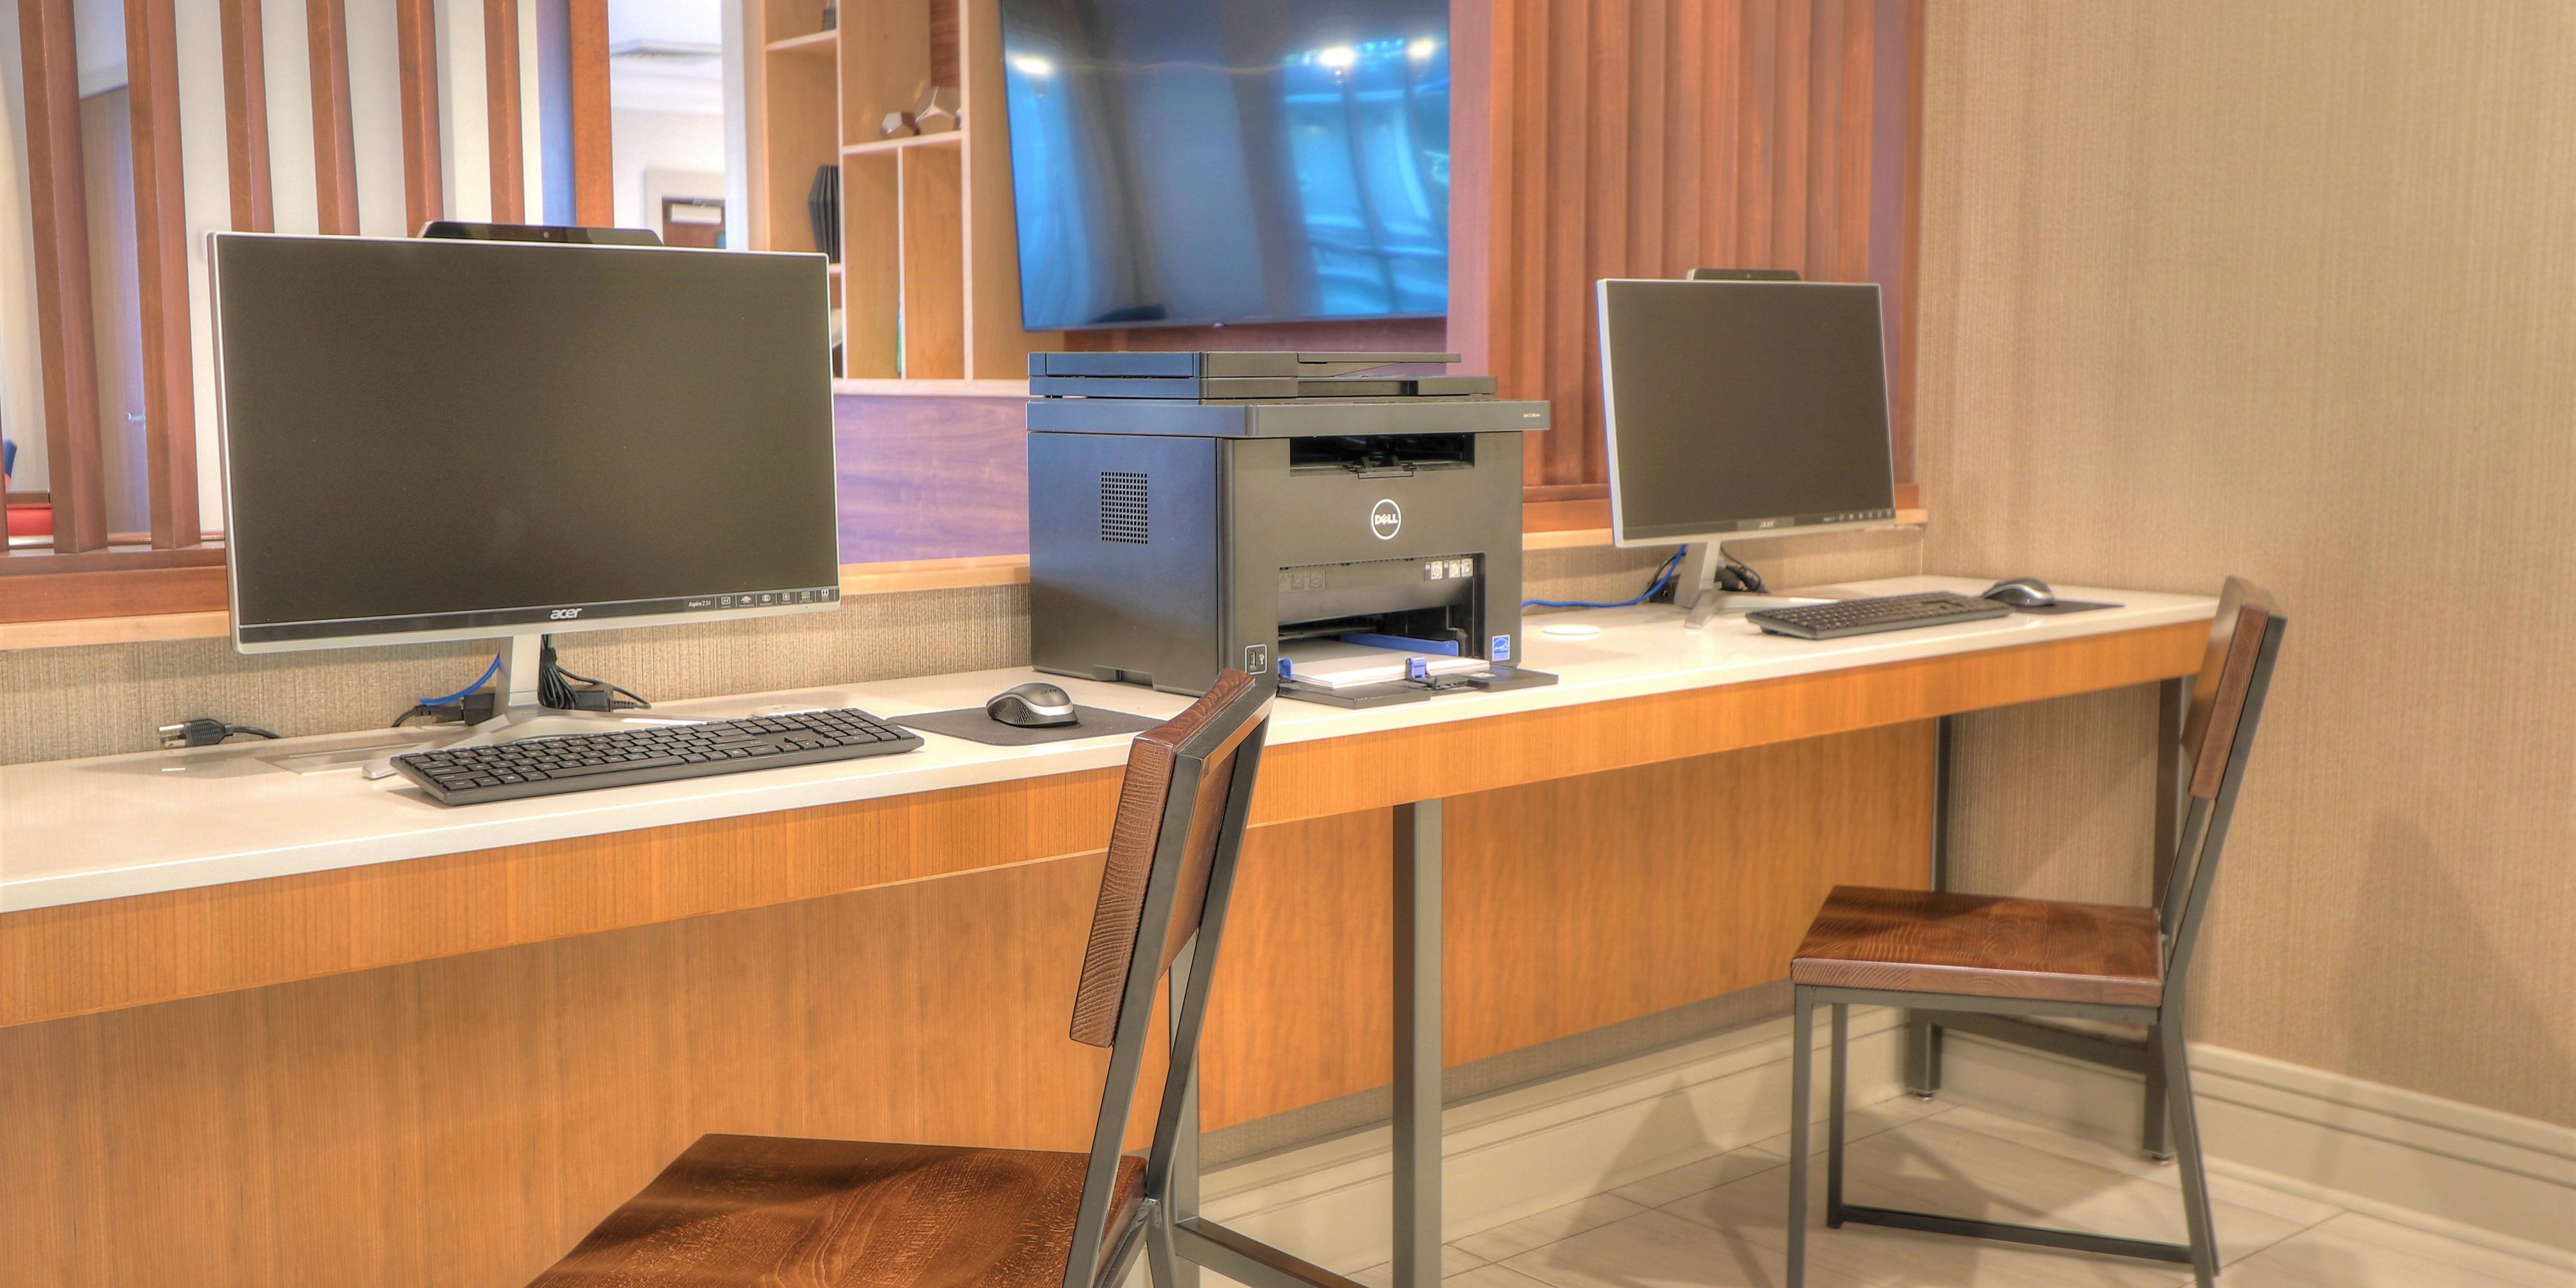 Stay connected while on the road in our 24 Hour Business Center located in our lobby.  Guest can print out documents, check their emails, social media, etc. while staying with us. 